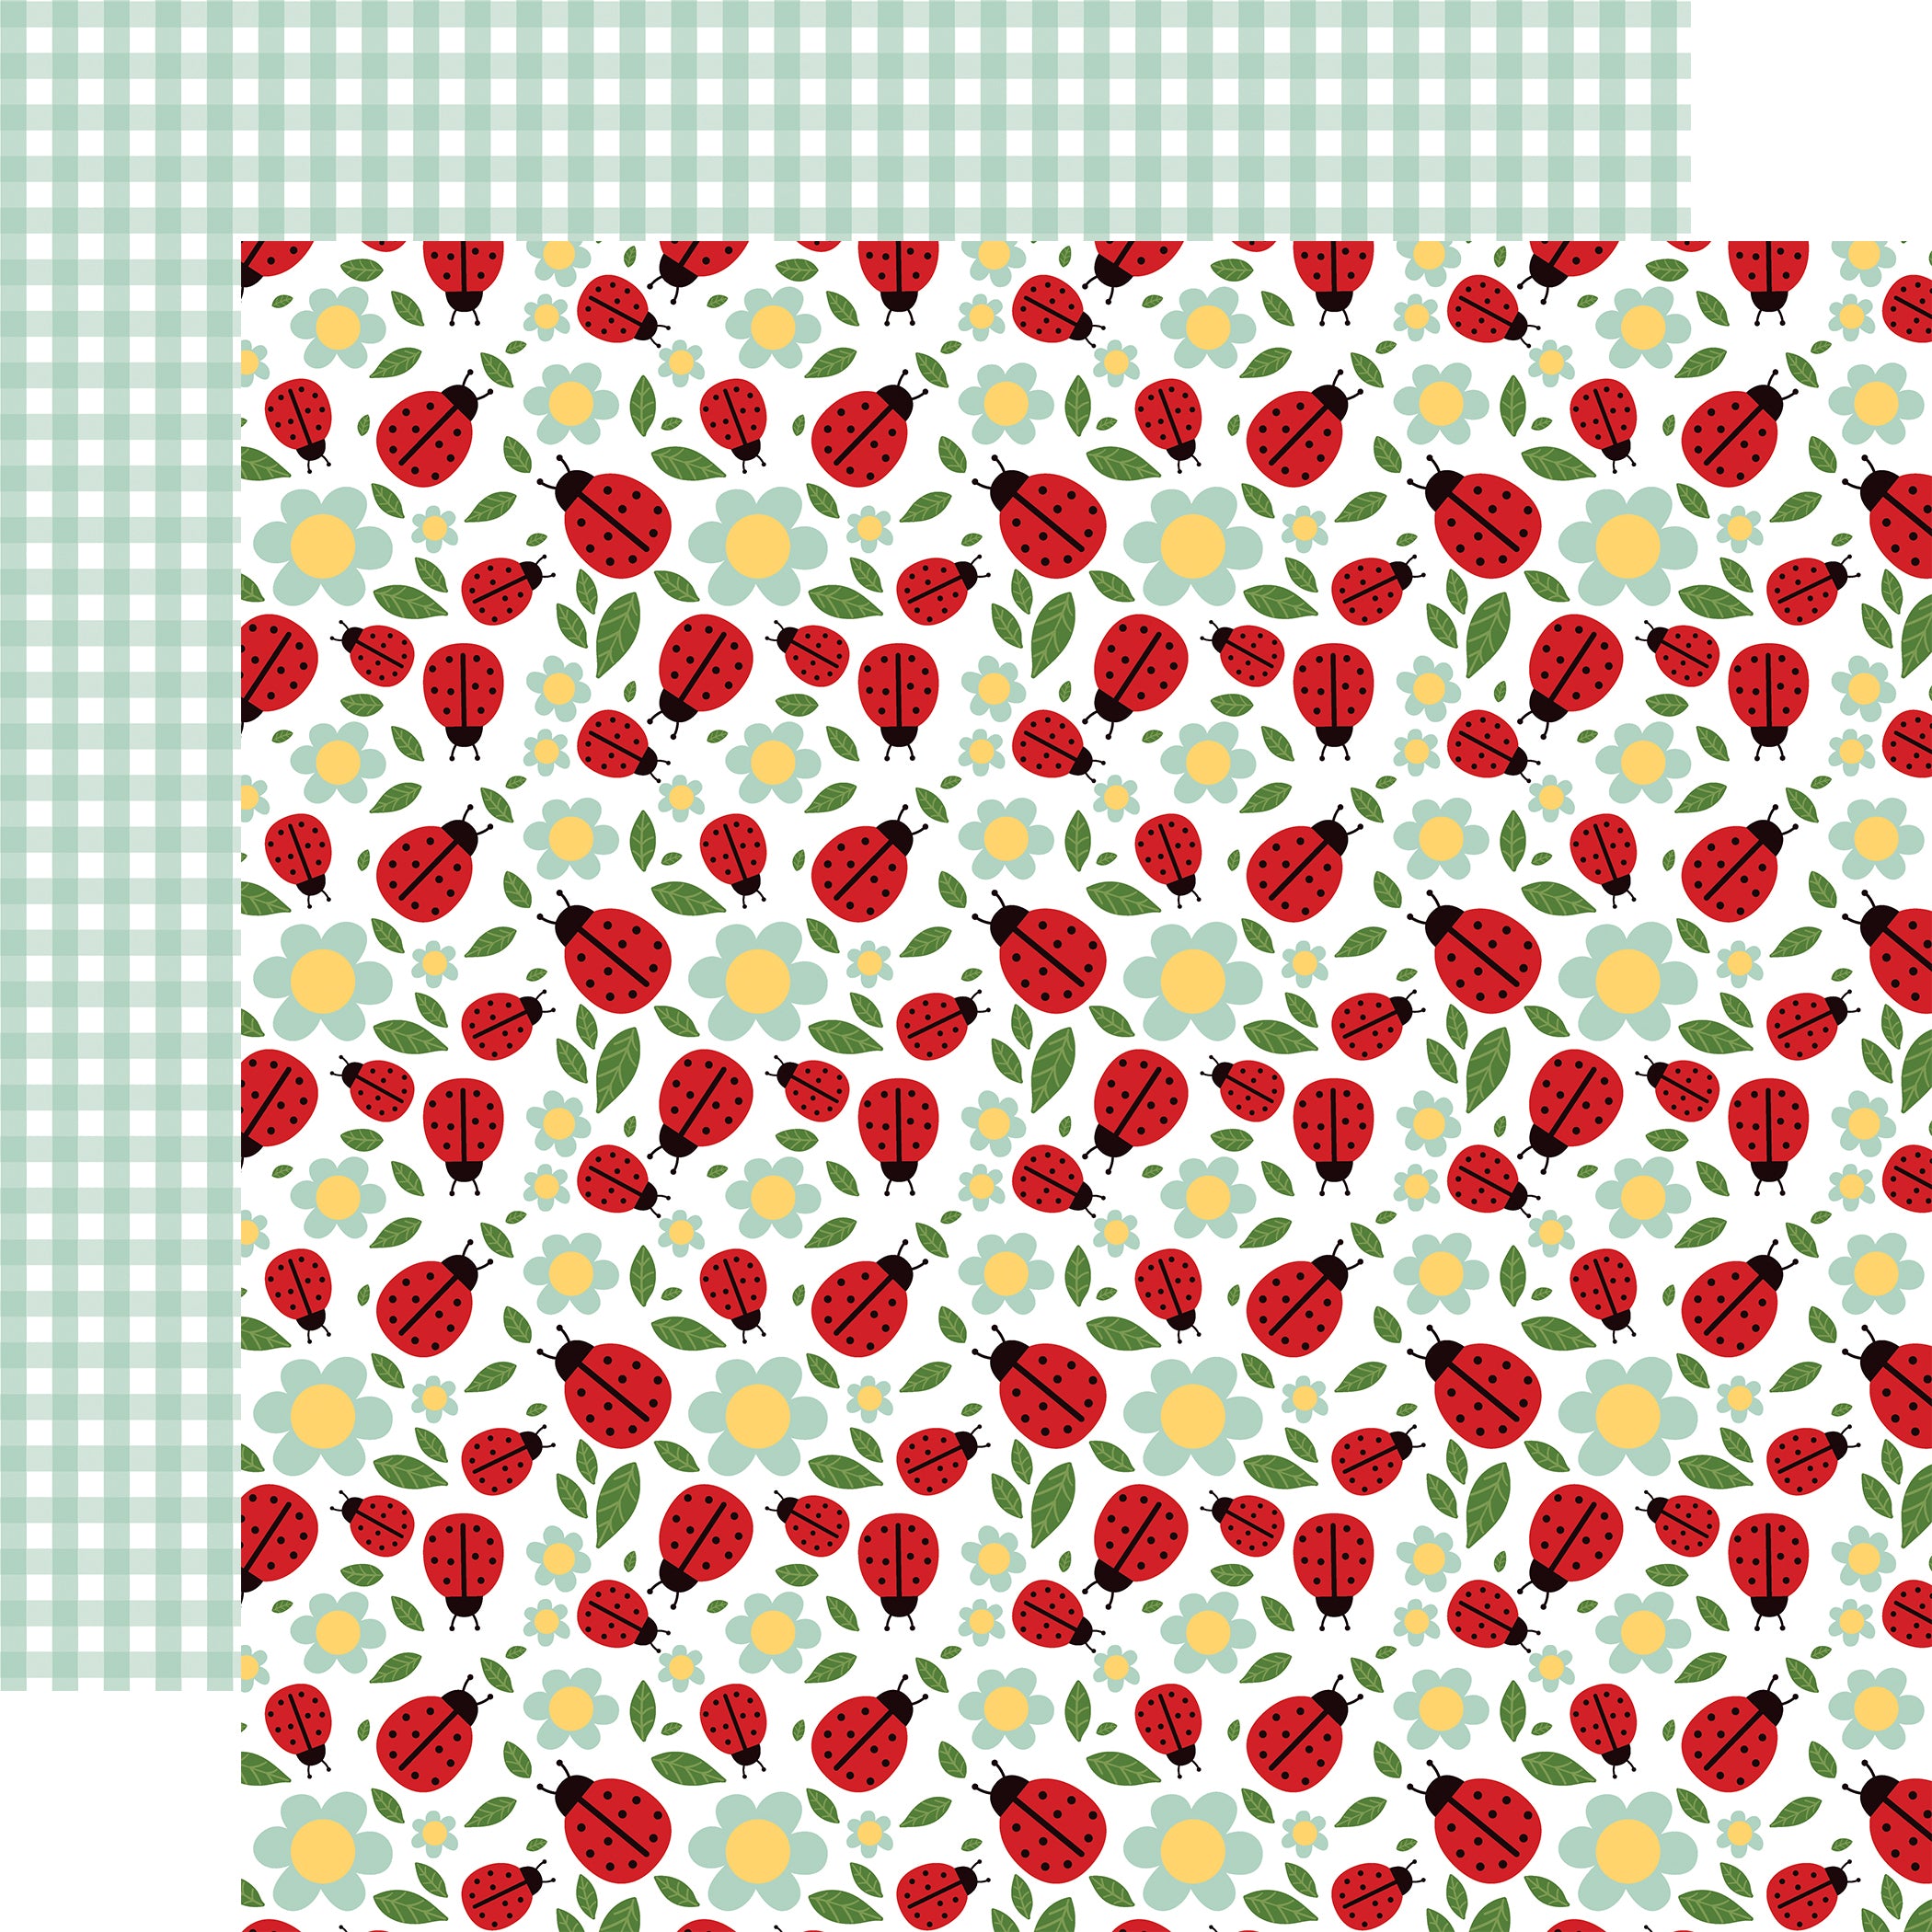 Little Ladybug Collection Cute As A Bug 12 x 12 Double-Sided Scrapbook Paper by Echo Park Paper